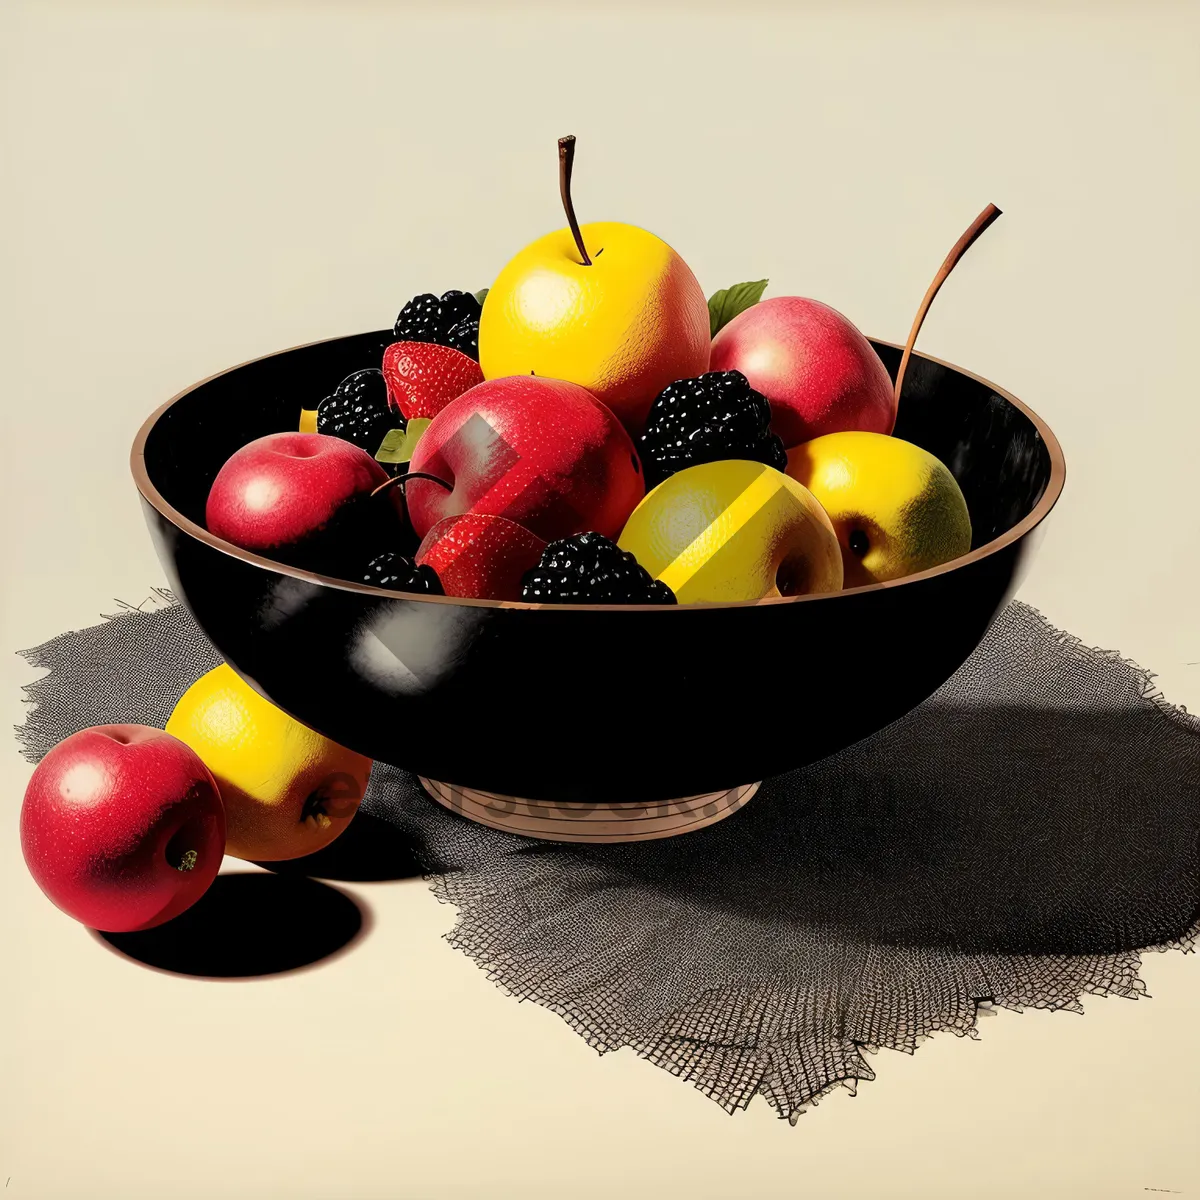 Picture of Delicious Summer Fruit Bowl: Apple, Grape, Cherry, Strawberry